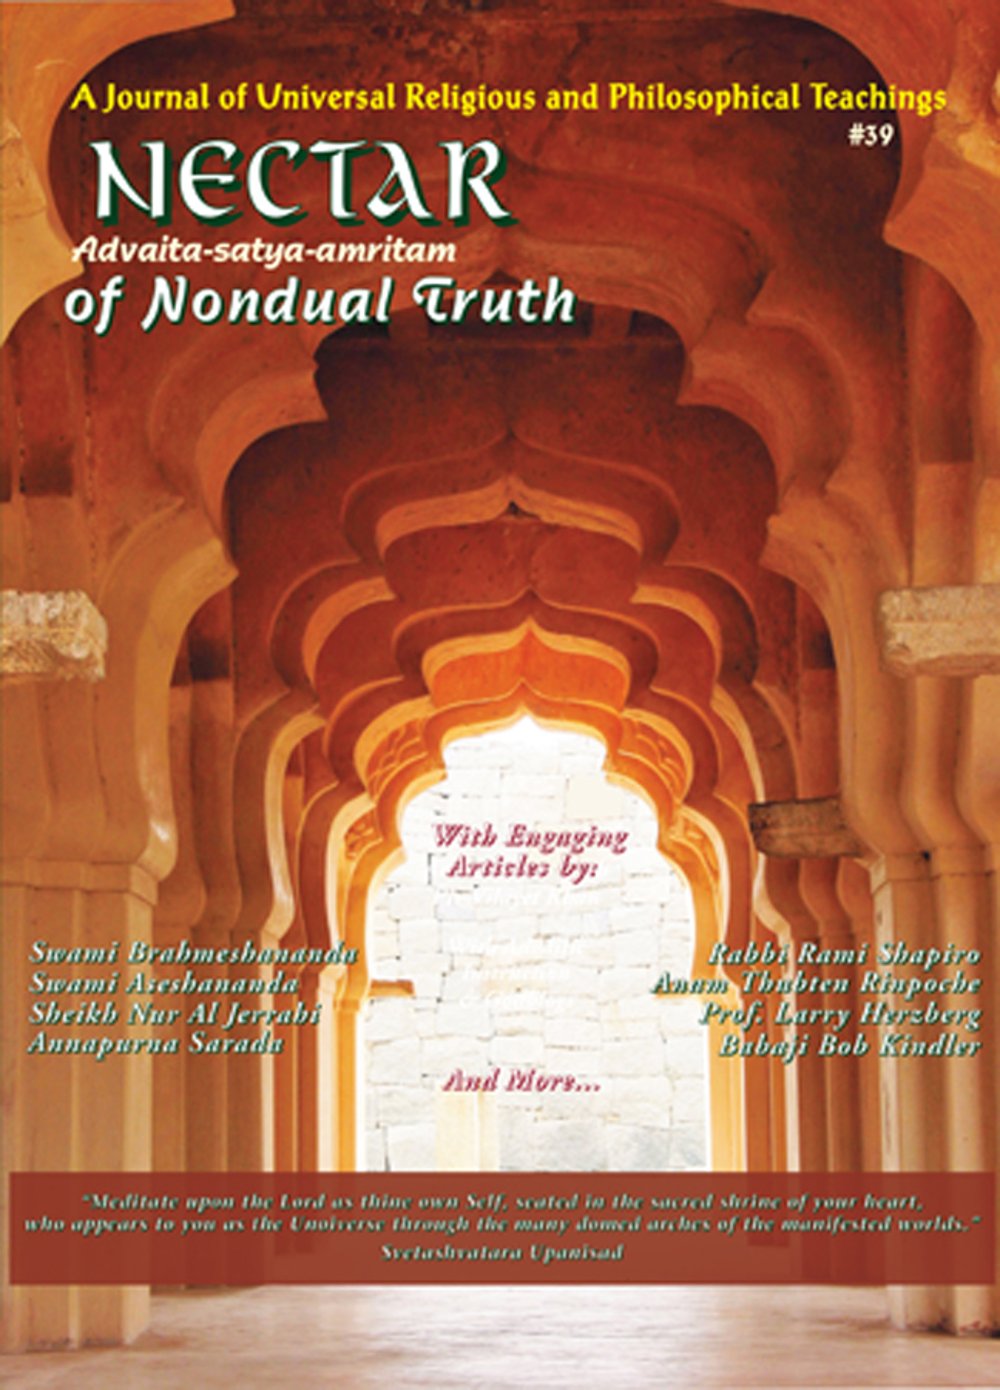 draft cover of Nectar of Nondual Truth #37